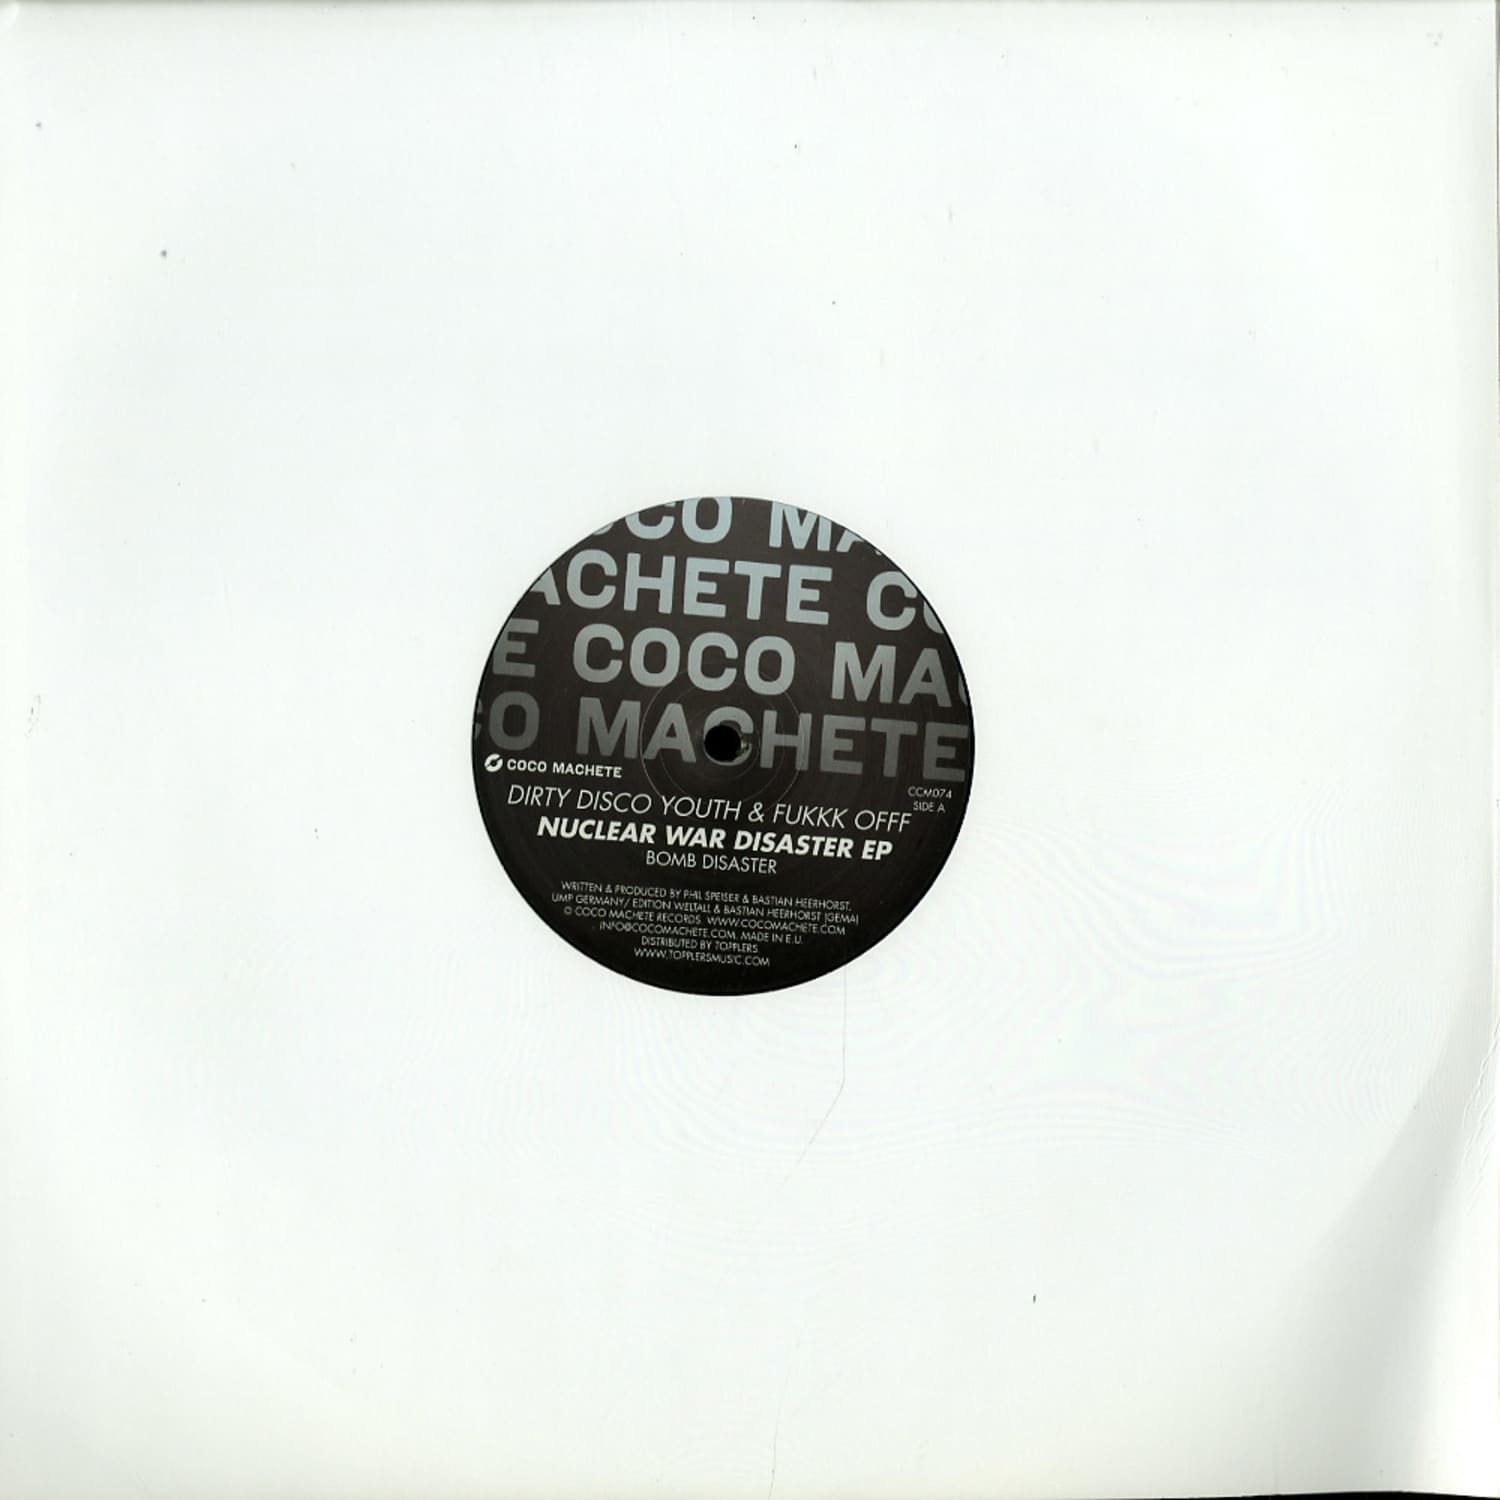 Dirty Disco Youth & Fukkk Offf - NUCLEAR WAR DISASTER EP